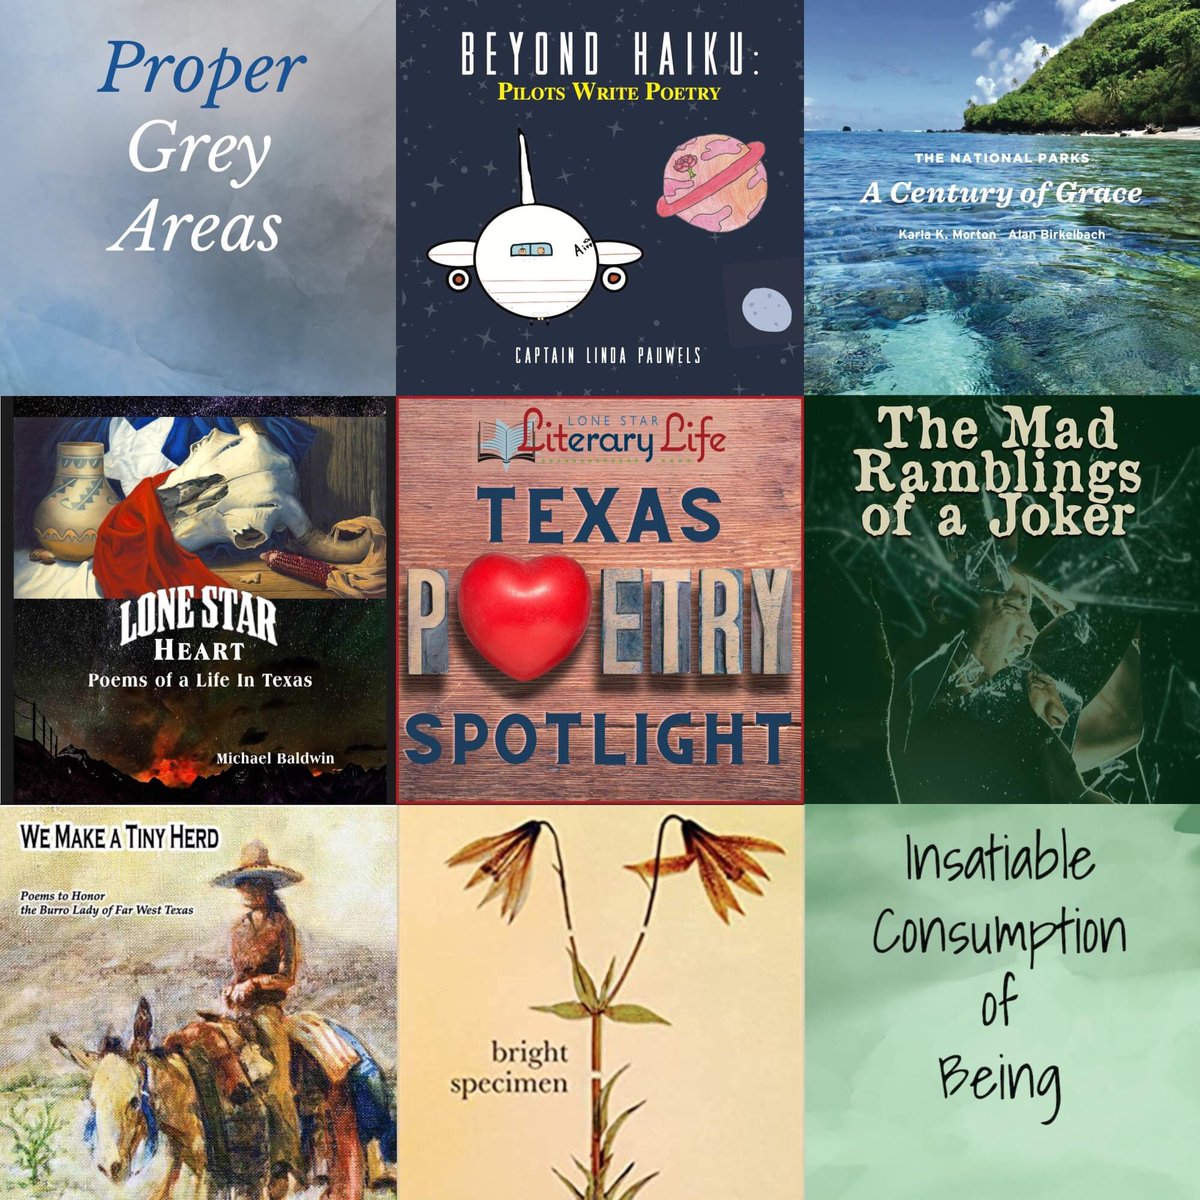 Celebrate #NationalPoetryMonth Texas-style with the @LoneStarLit Texas Poetry Spotlight + #WIN 1 of 8 autographed poetry collections! Visit Bit.ly/LoneStarPoetry… for titles.
#TexasPoets #TexasPoetry #LiteraryTexas  lonestarliterary.com/content/texas-… 

Rafflecopter:
rafflecopter.com/rafl/display/1…